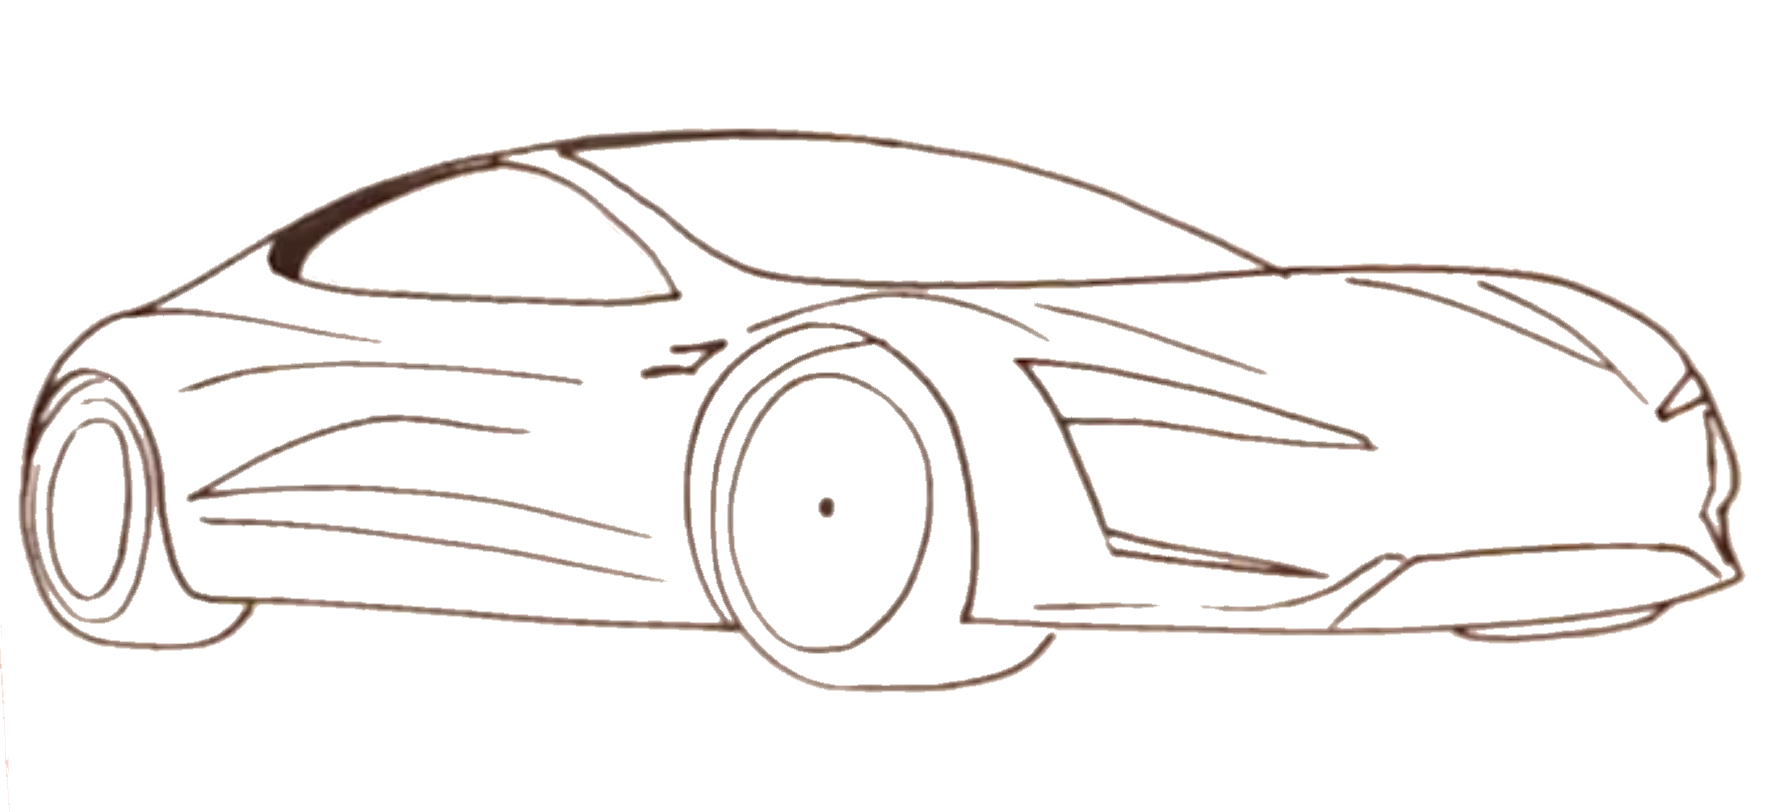 How to draw tesla roadster